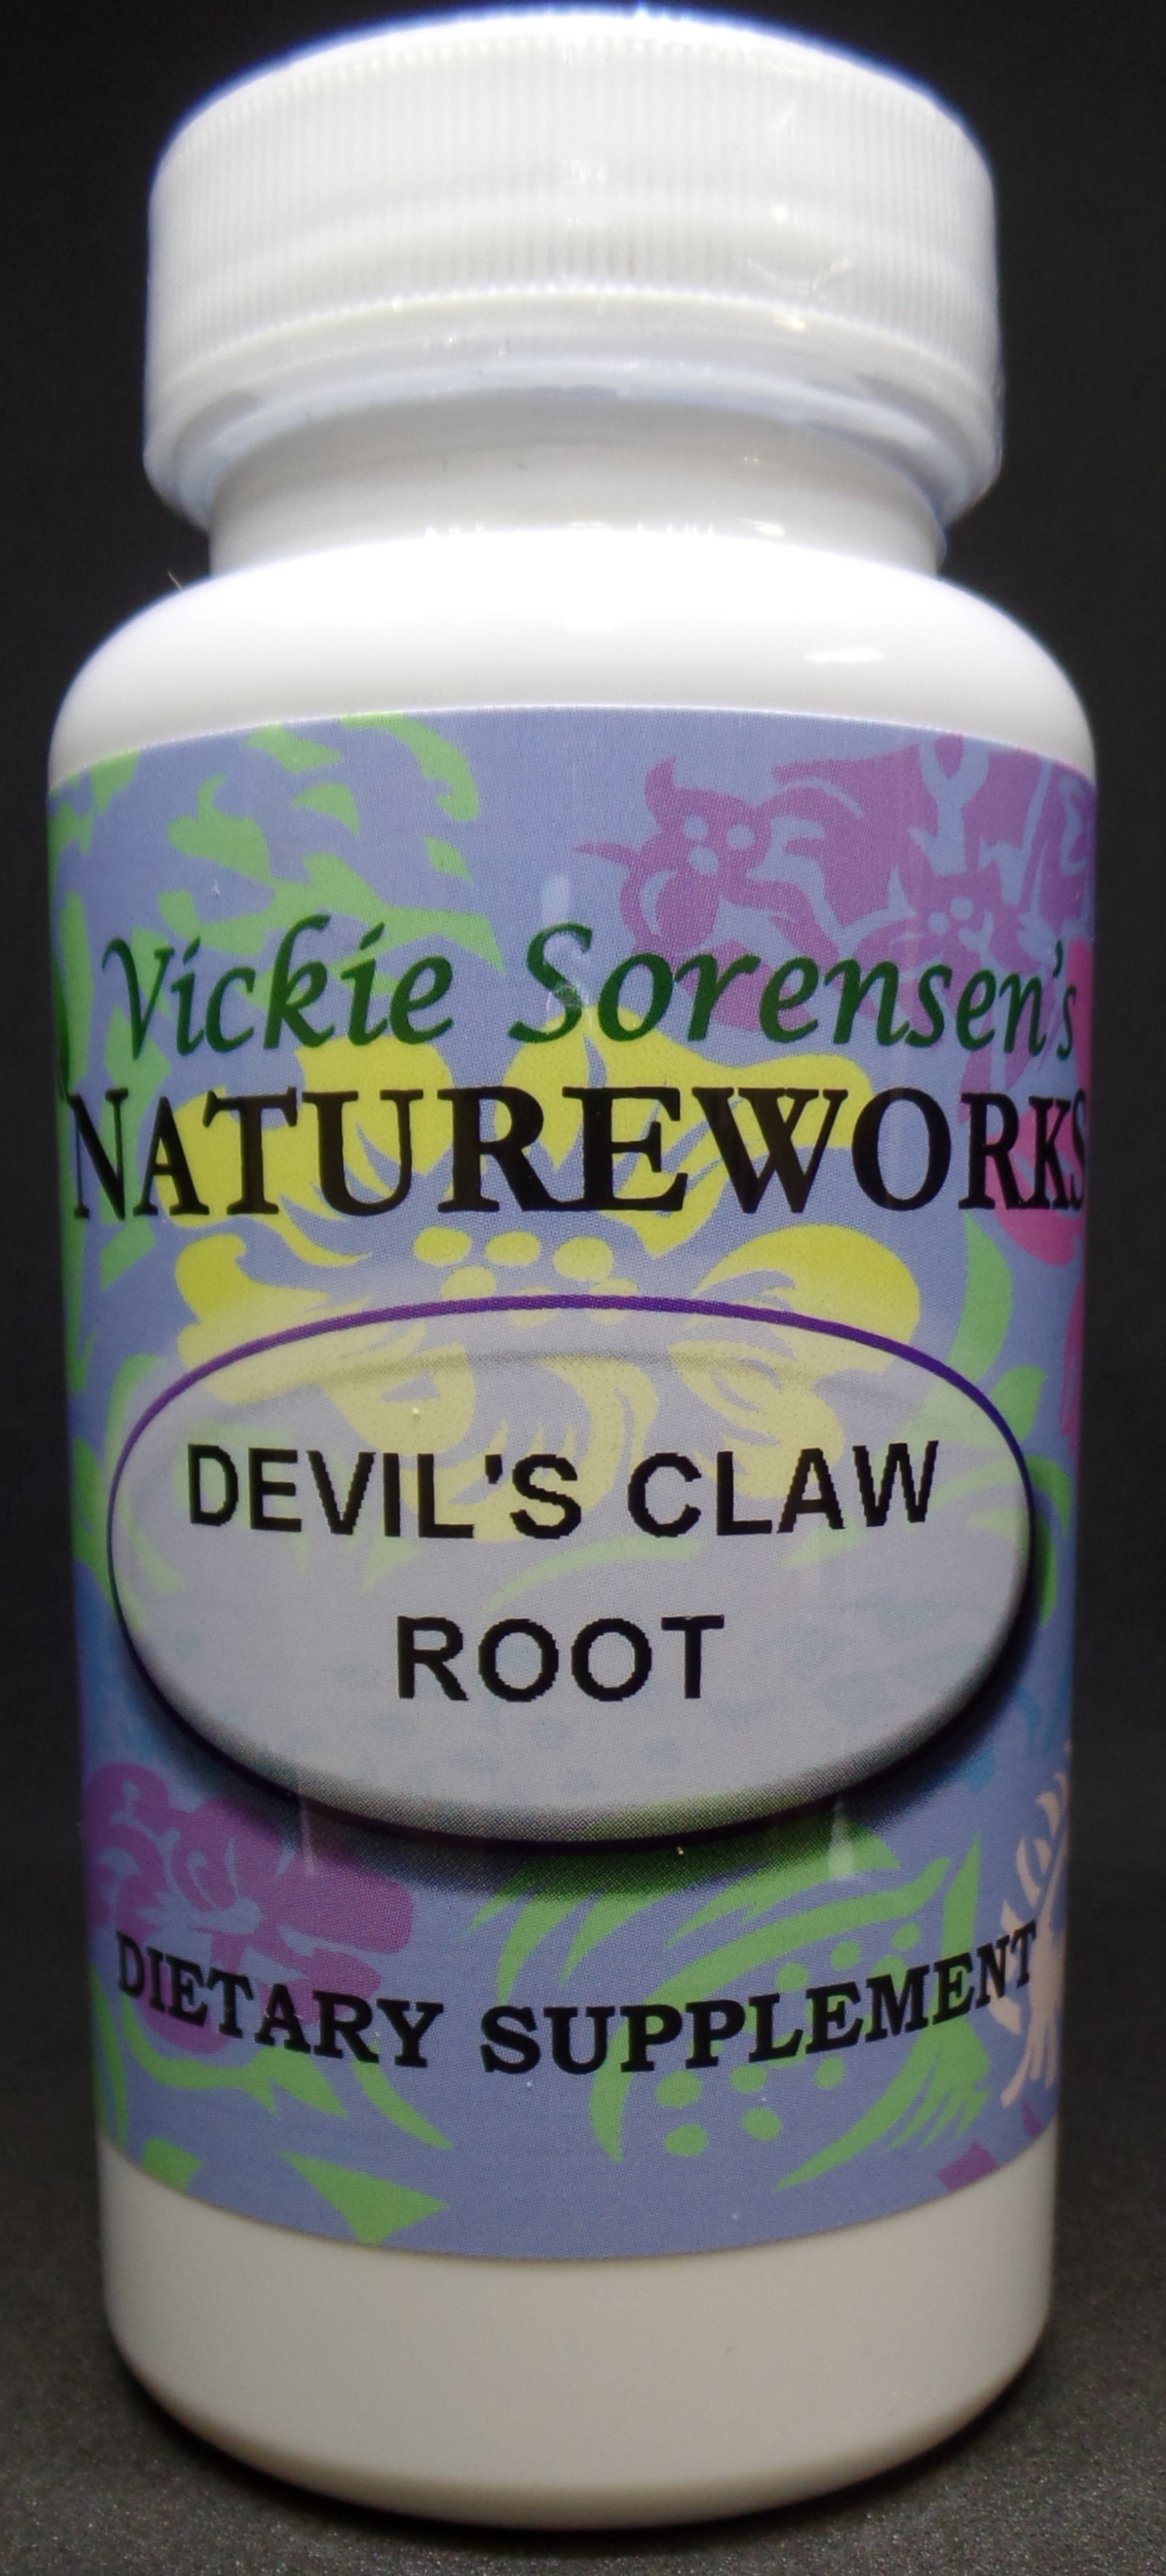 Devils Claw Root